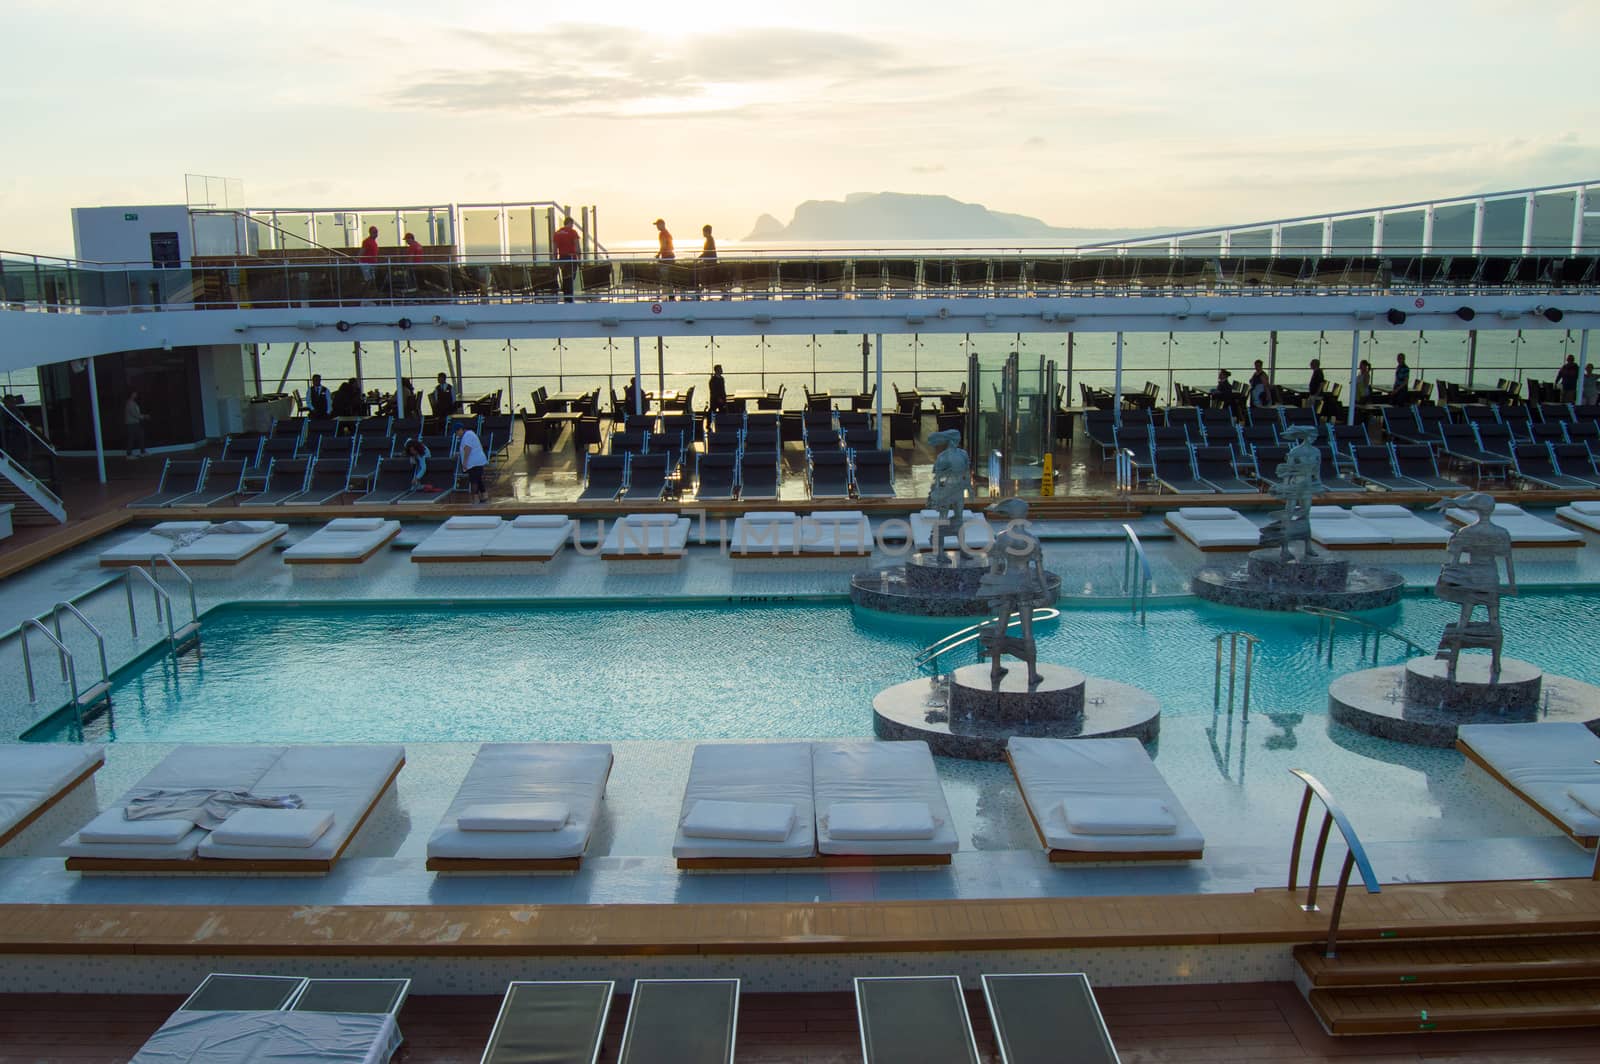 Outdoor deck with swimming pool, sun beds, video screen. CRUISE ship MSC Meraviglia, 8 October 2018